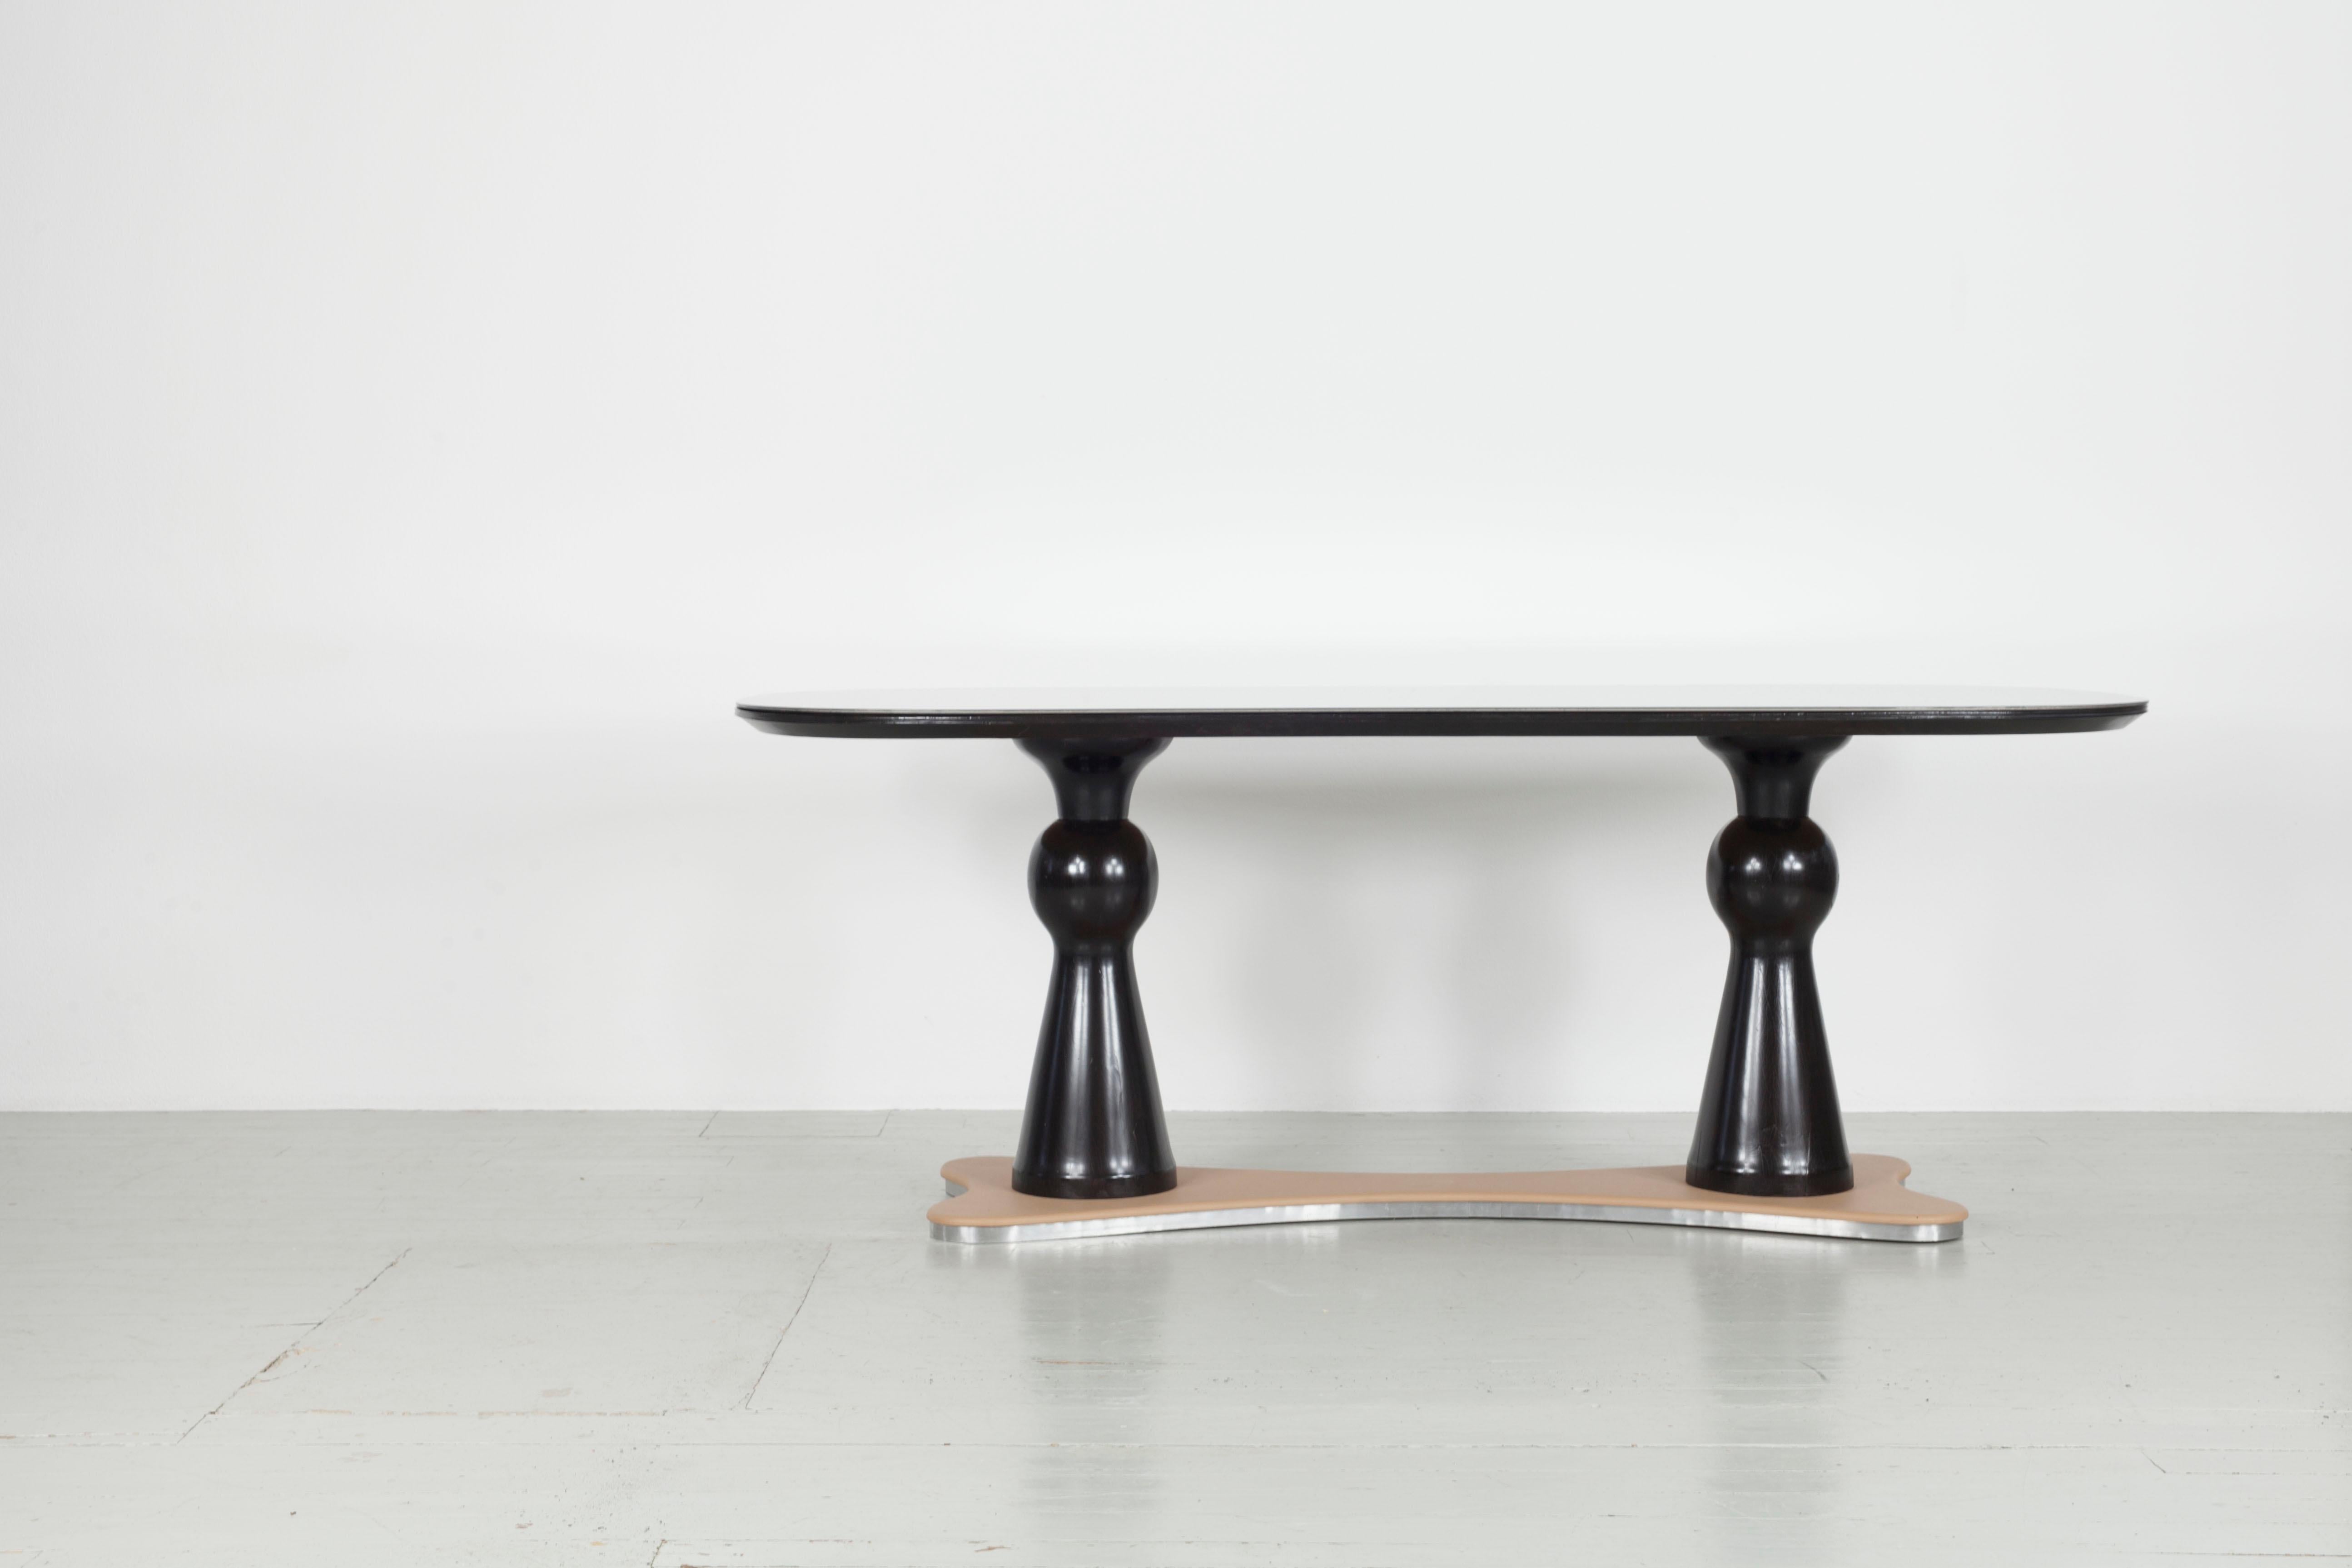 This dining table was made in Italy in the 1940s. The oval table top with grey glass overlay sits on two unusual, dark-stained wooden table legs. These table legs are placed on a table base covered with imitation leather. The table base is framed by